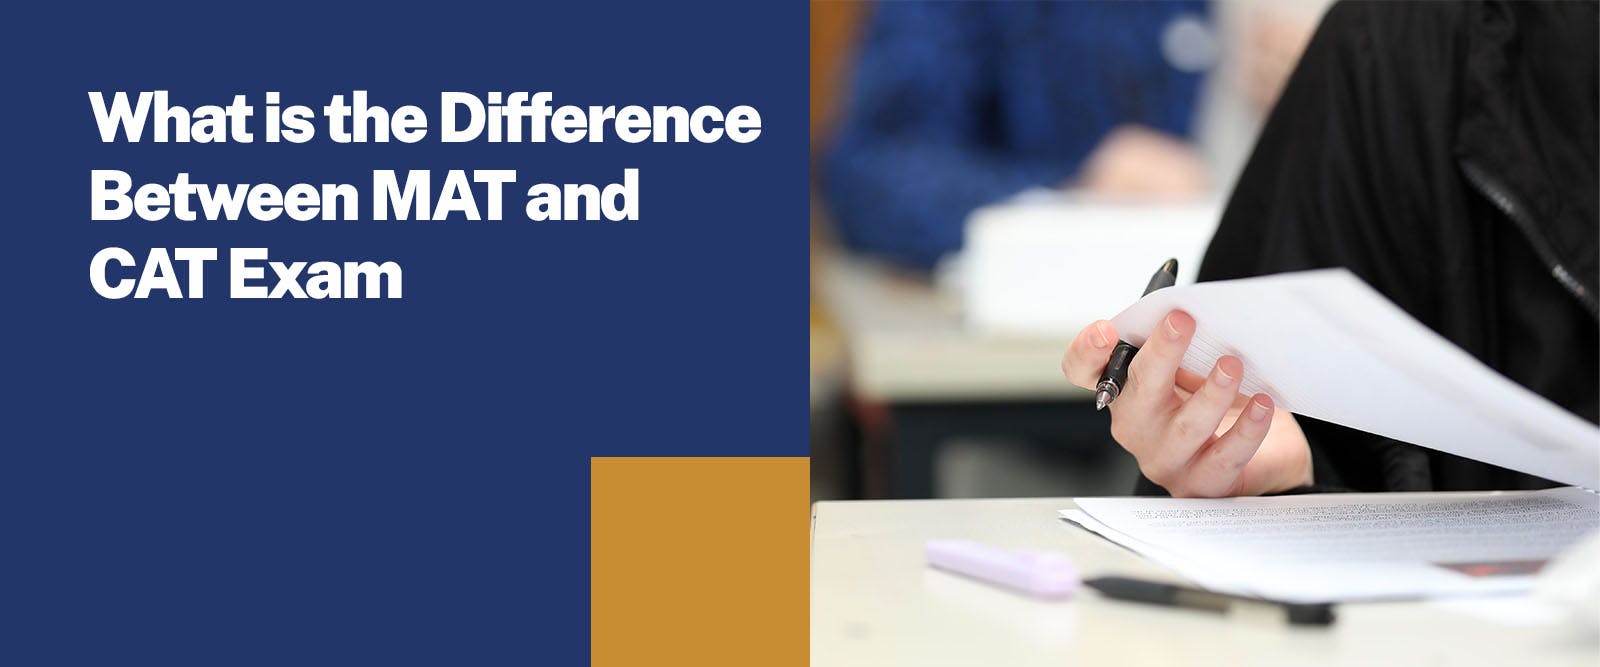 What is the Difference Between MAT and CAT Exam